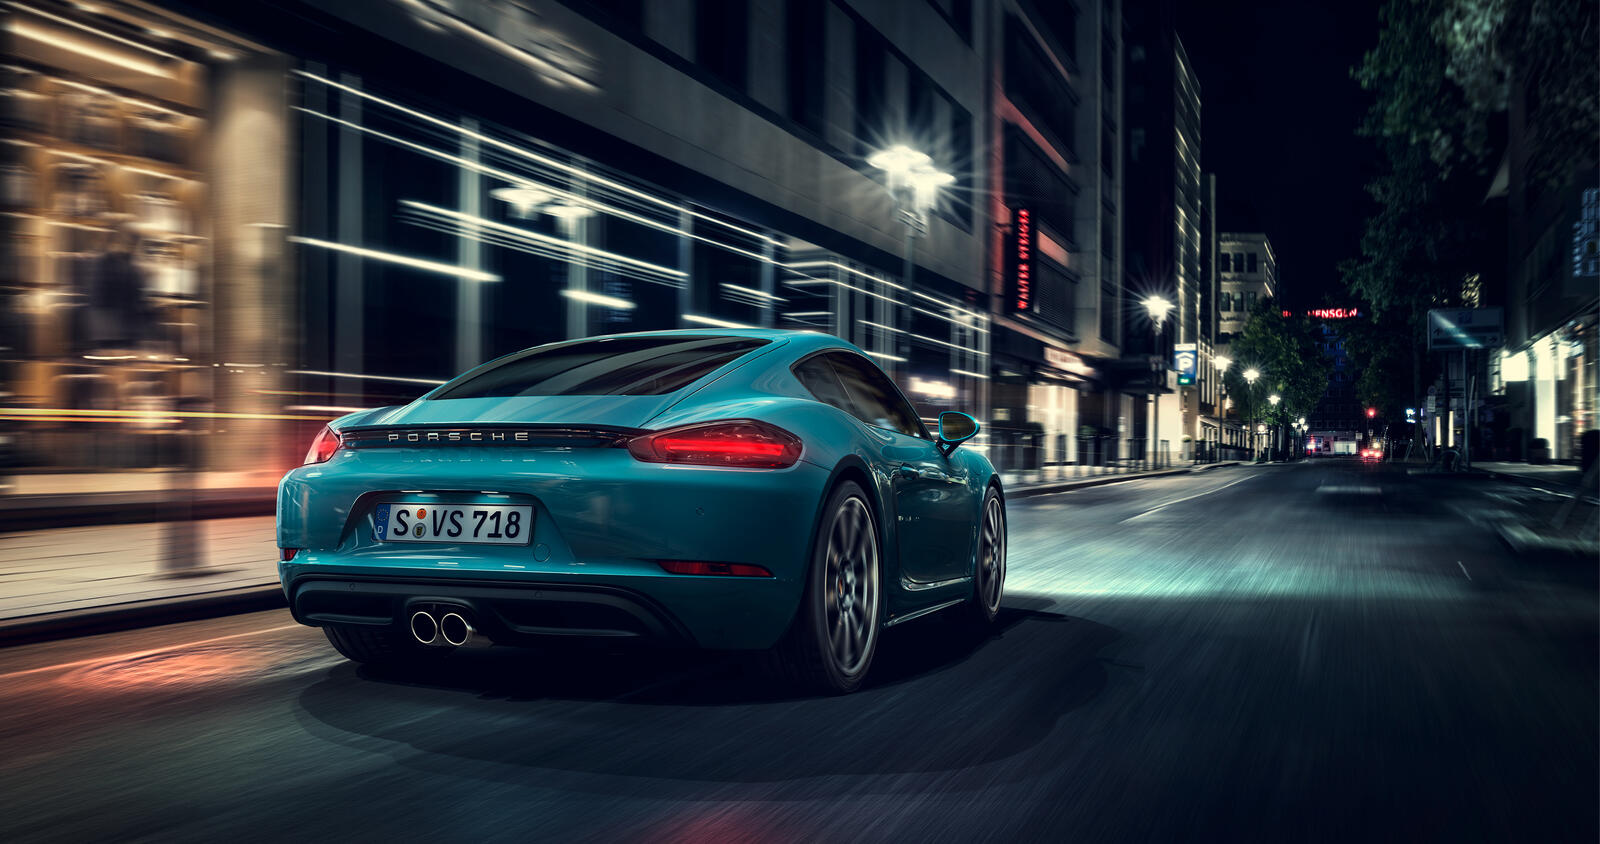 Wallpapers Porsche Cayman view from behind in move on the desktop